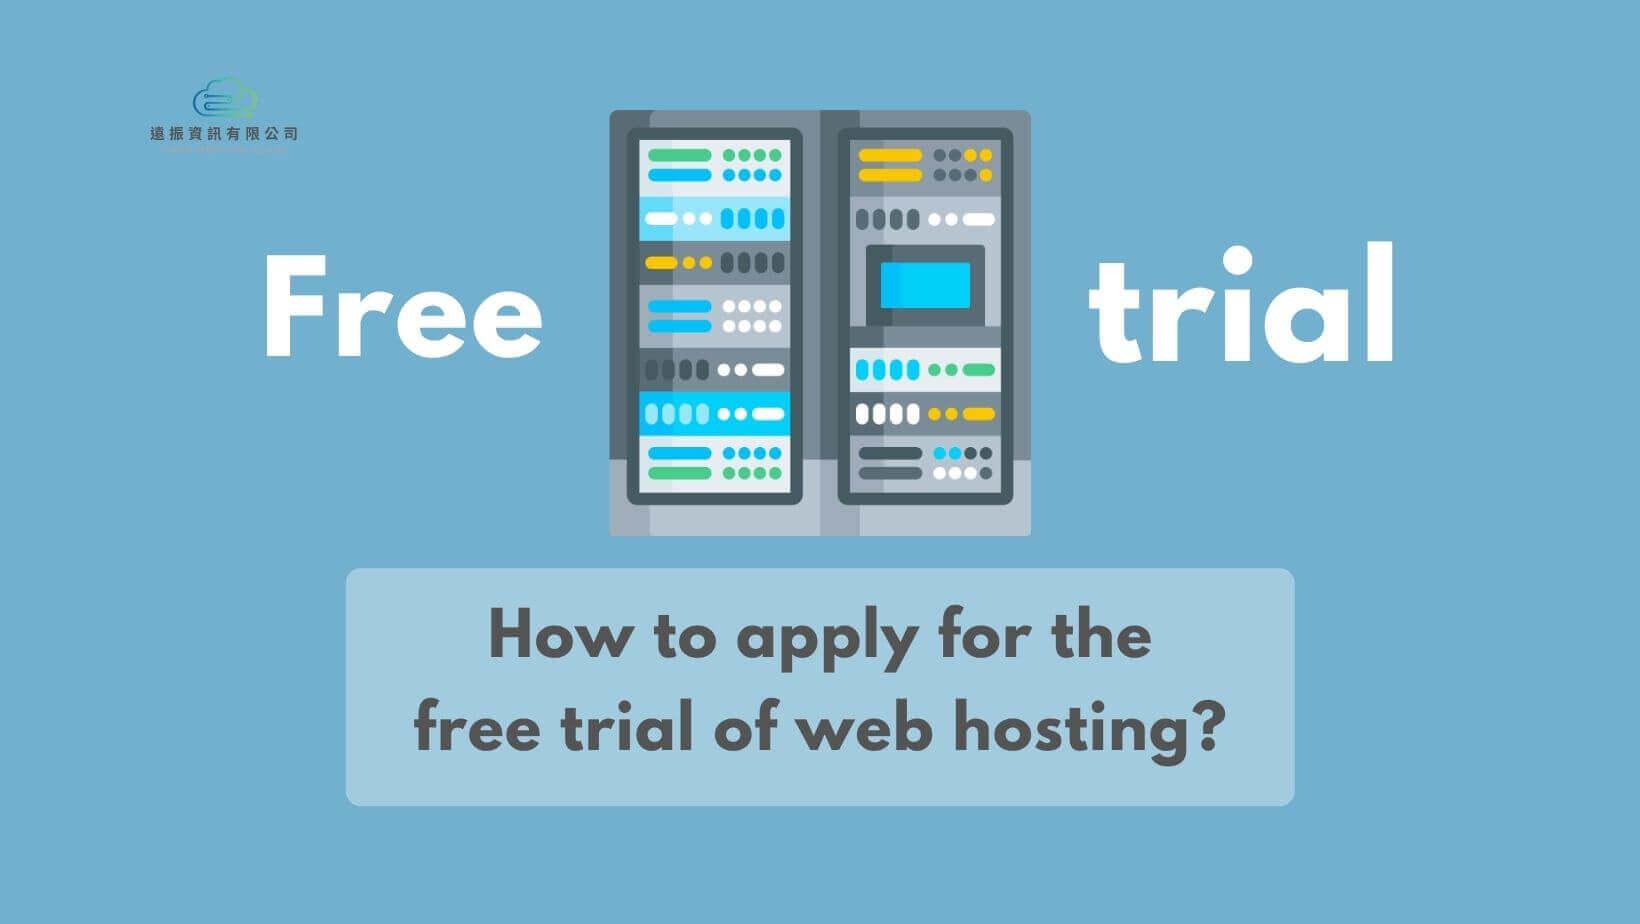 How to apply for the free trial of web hosting